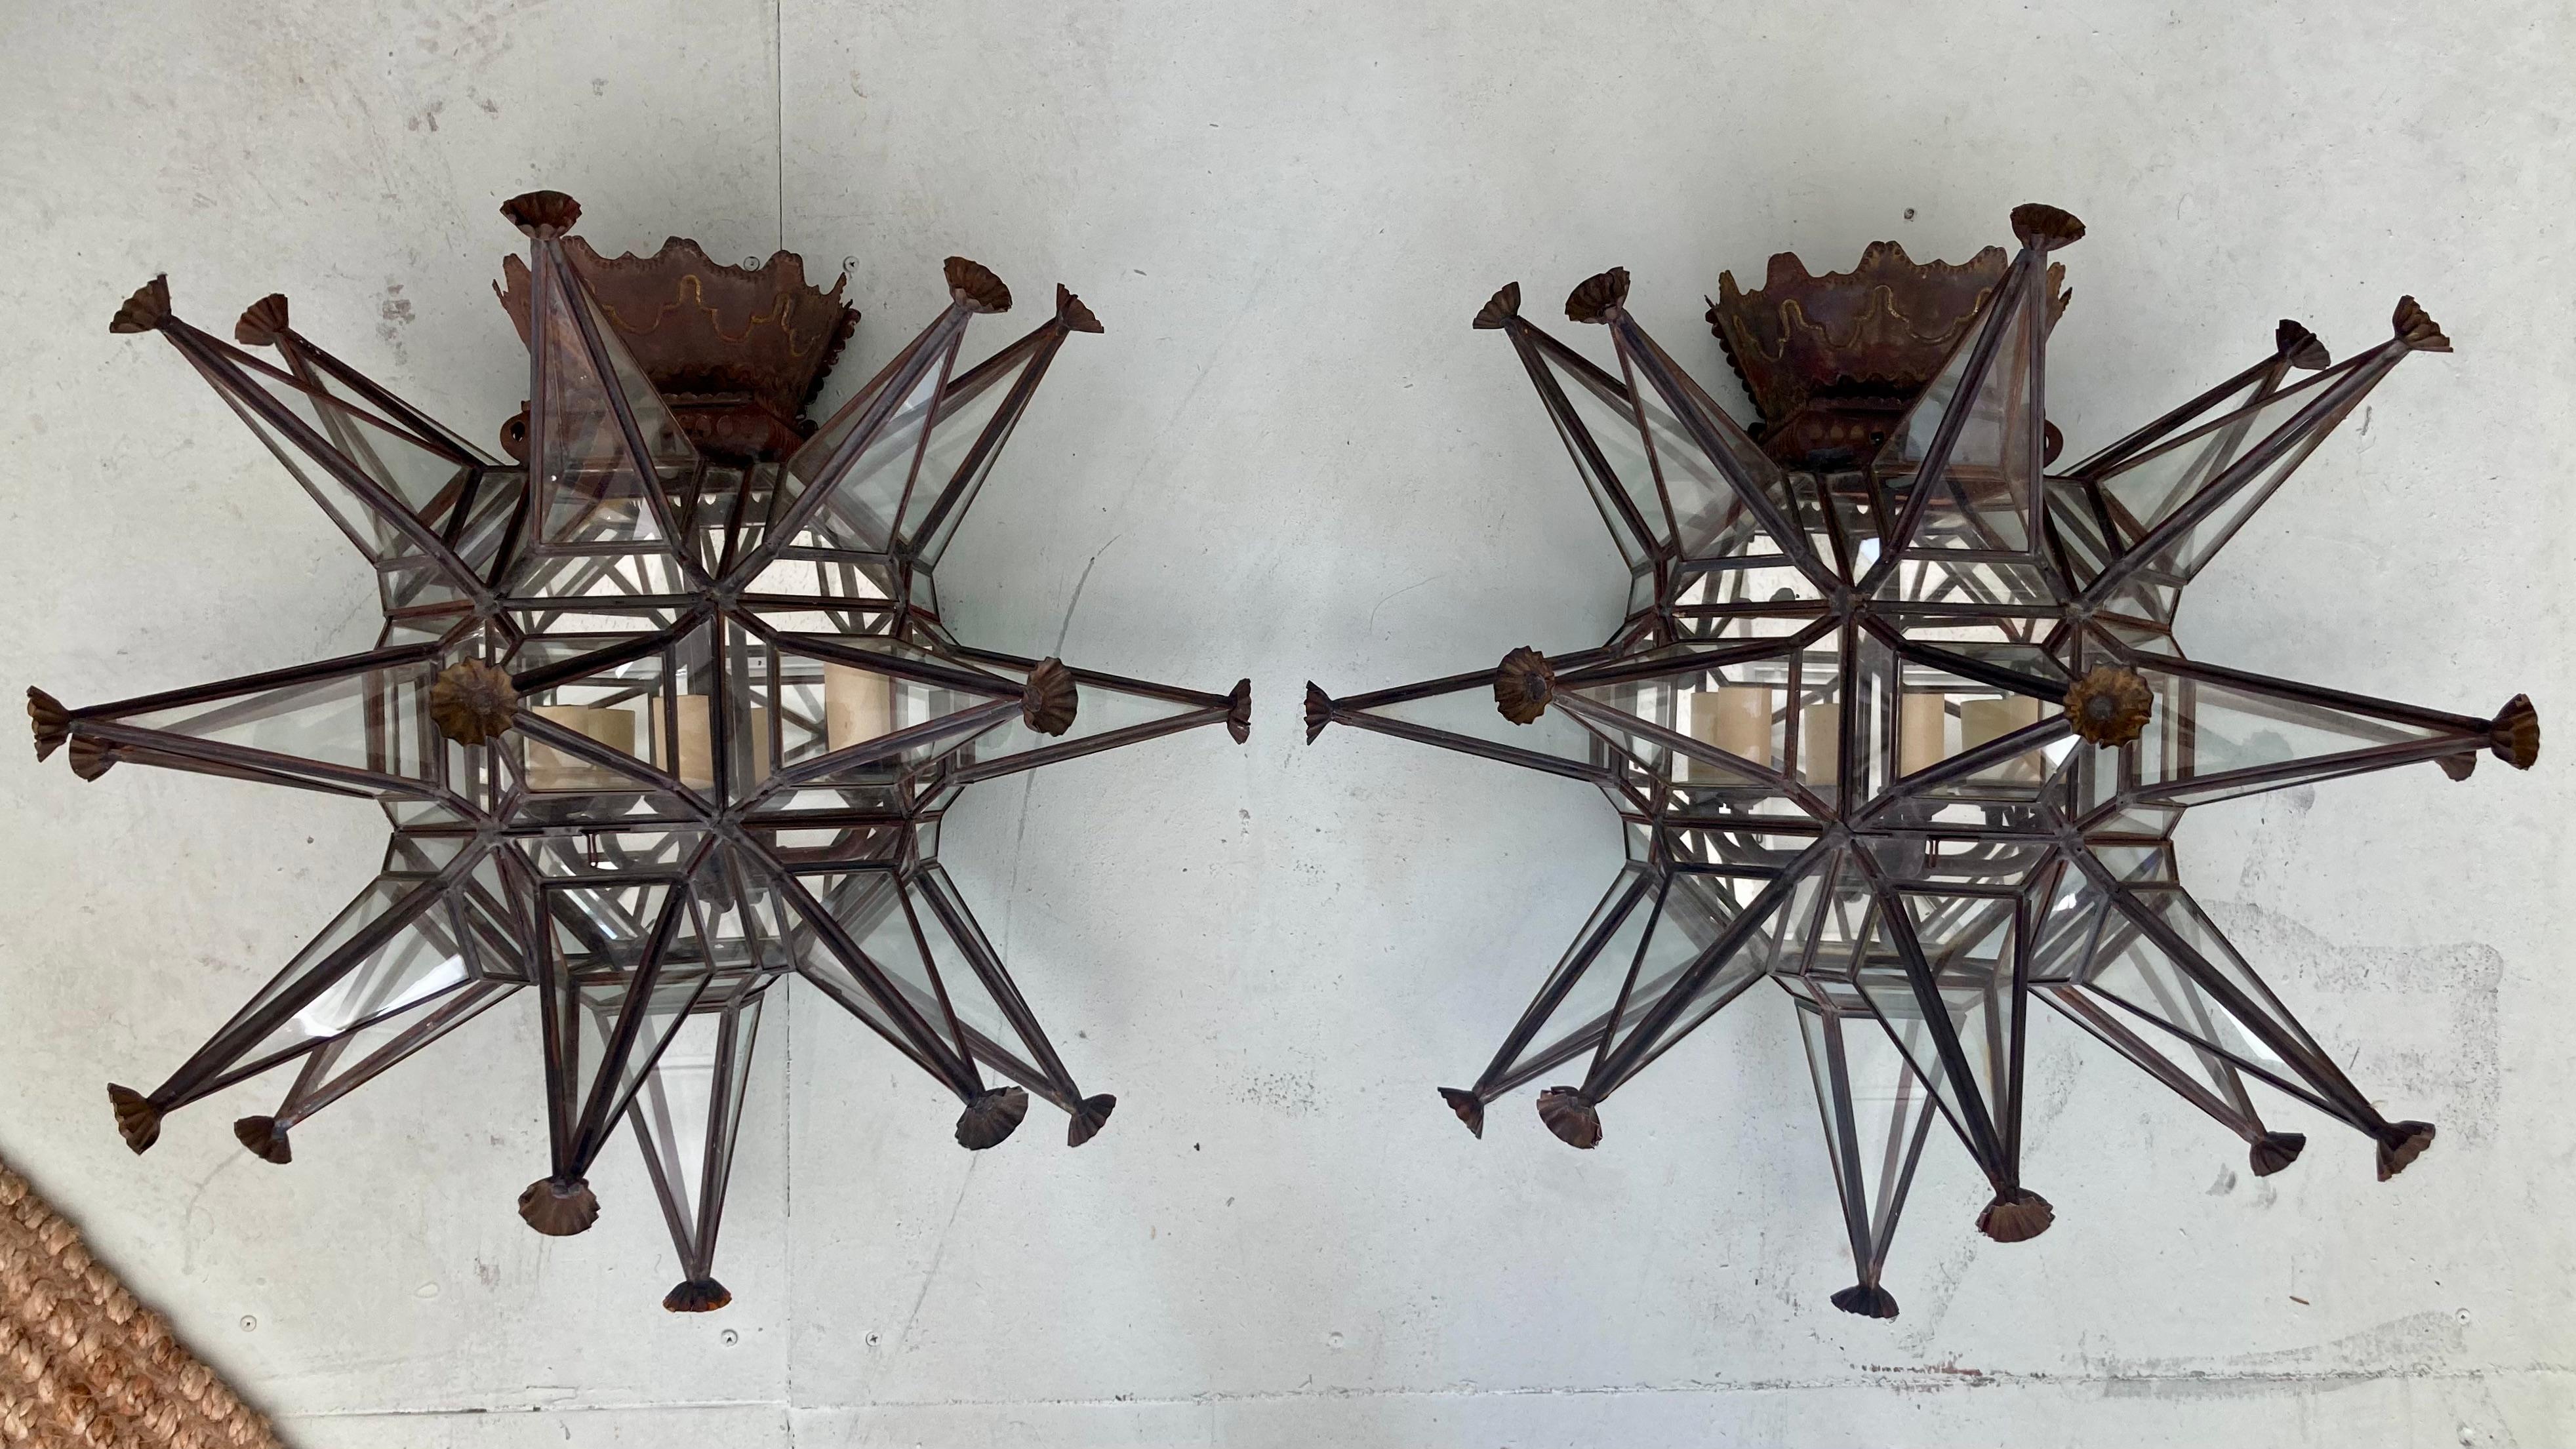 Beautiful pair of Paul Ferrante large scale wall sconces. Very detailed in a star shape. These are very large, dramatic, and also very deep dimensions. They have a 1920s Mizner look to them. Add some architecture to your home.